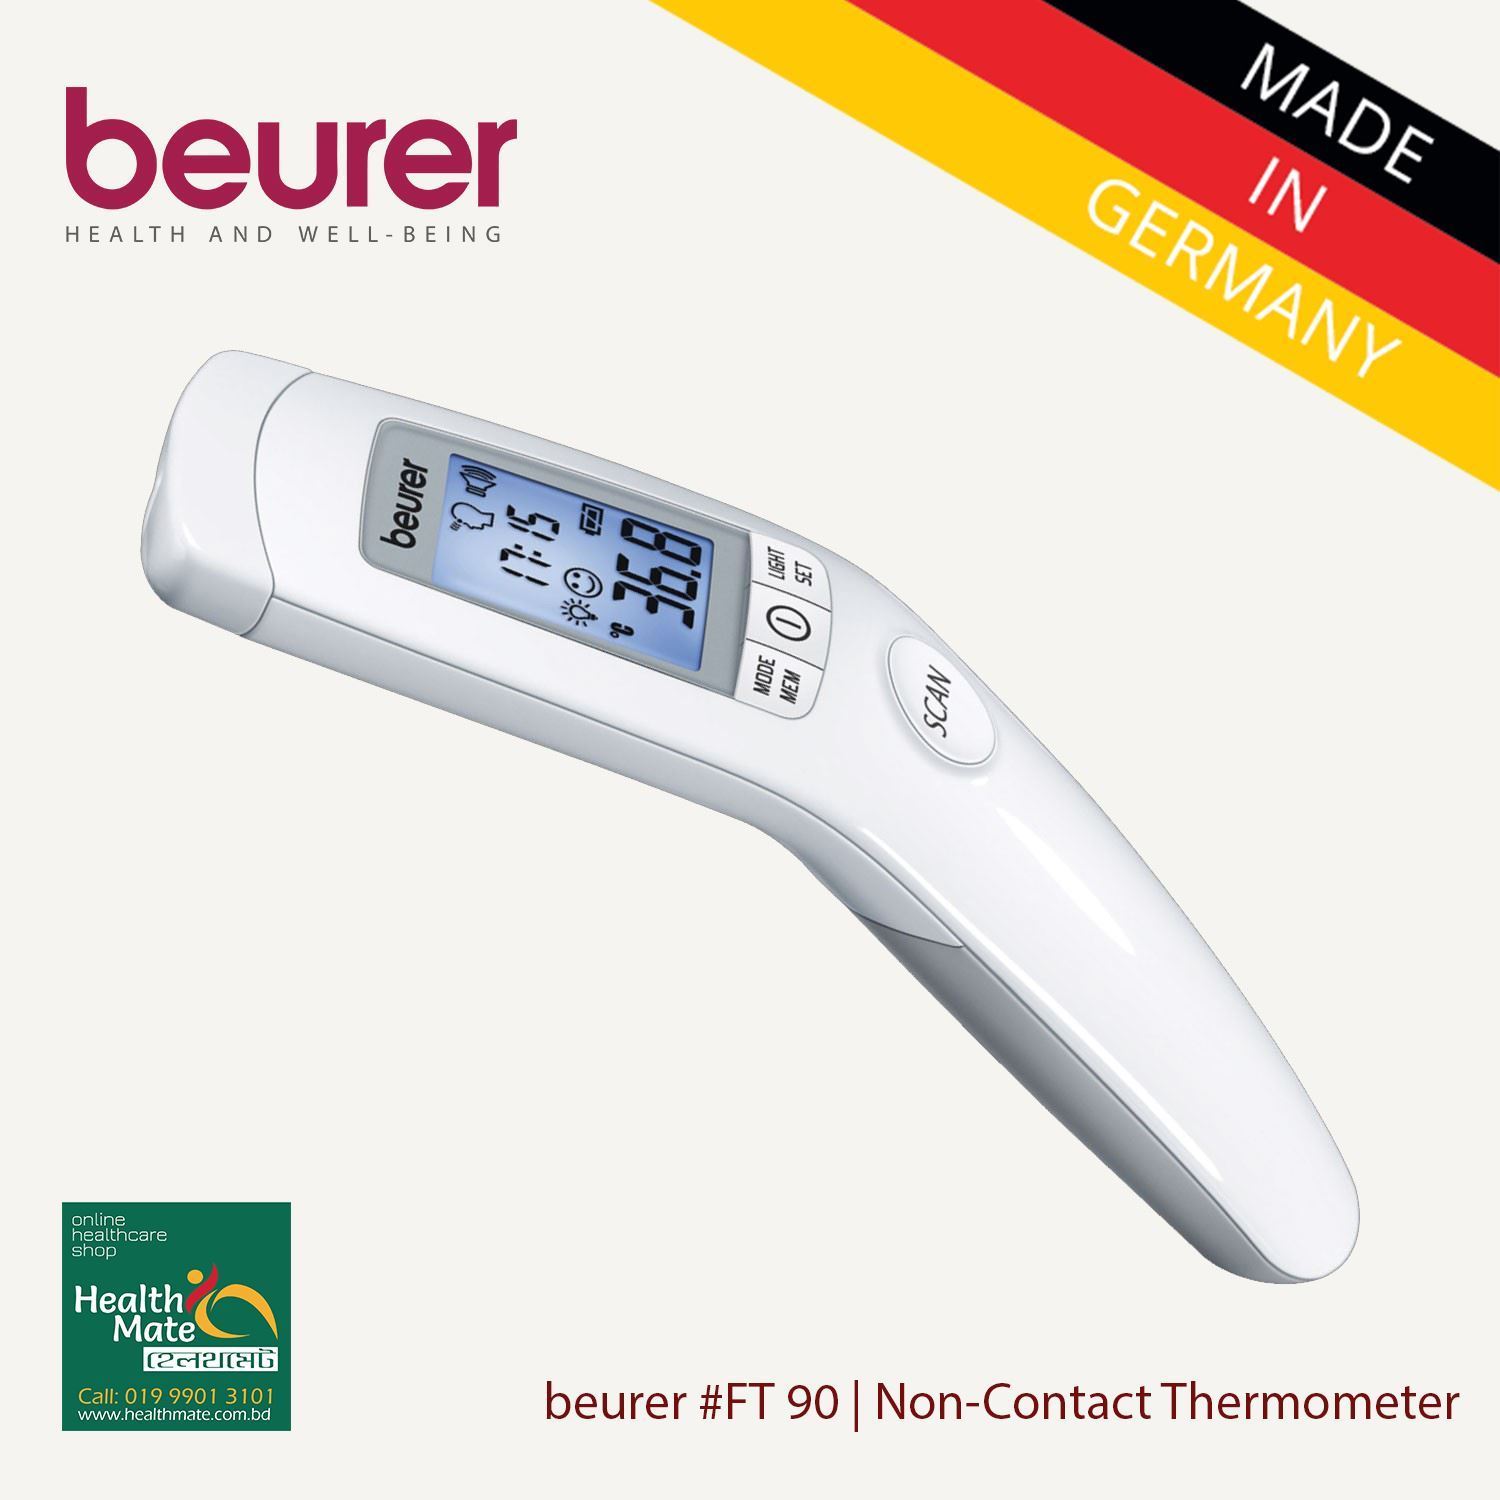 Beurer FT 90 Non-contact Thermometer